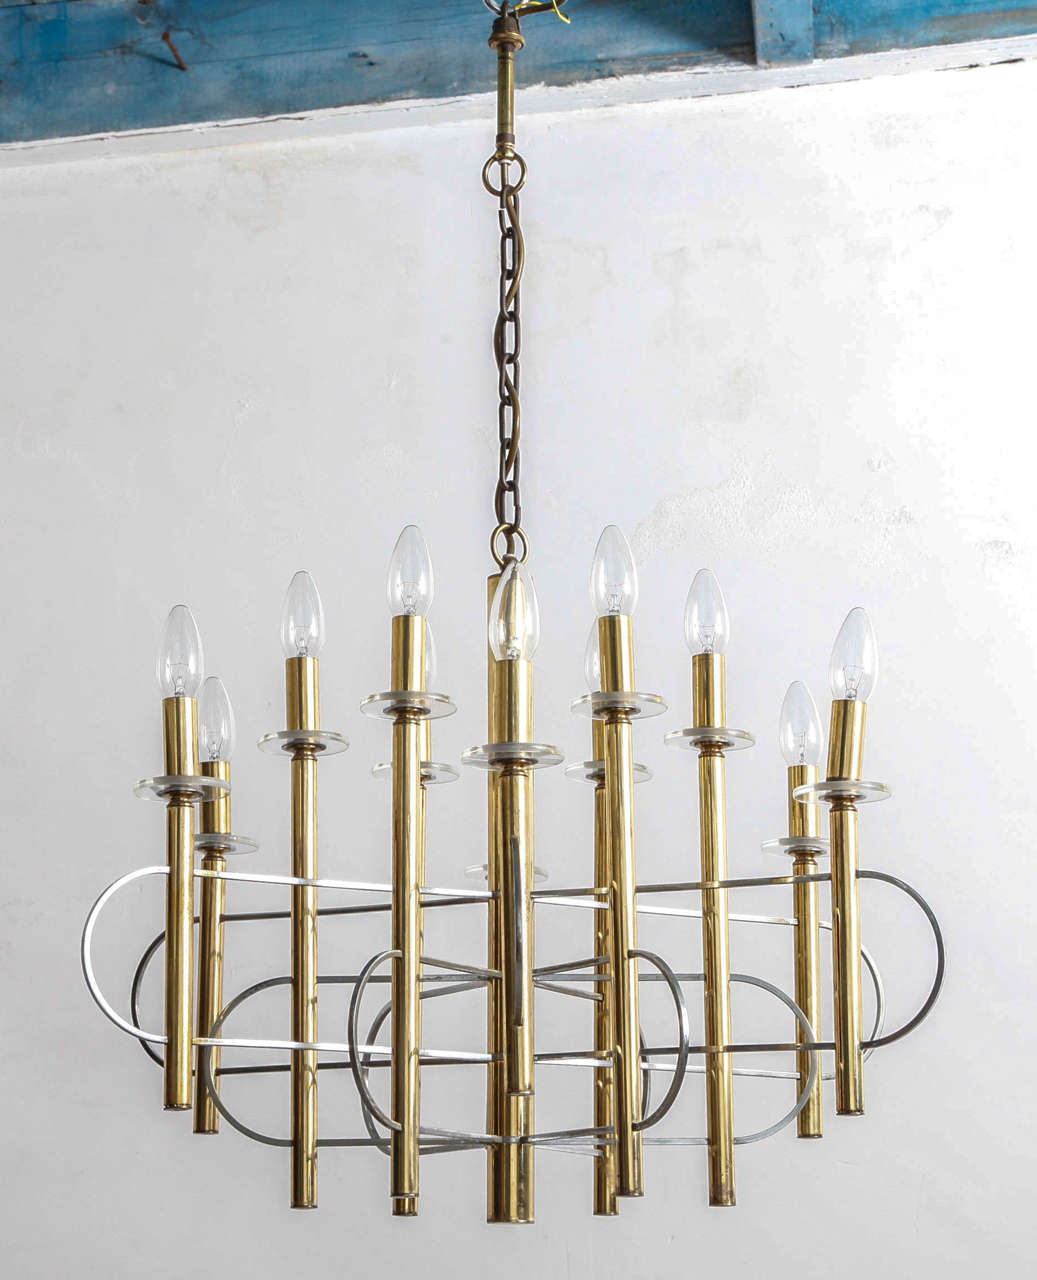 A stunning chandelier with twelve arms at alternating lengths, each holds a bulb, and elongated loop bands connecting them all finished in brass and brushed steel.By Sciolari. Italian, circa 1960.